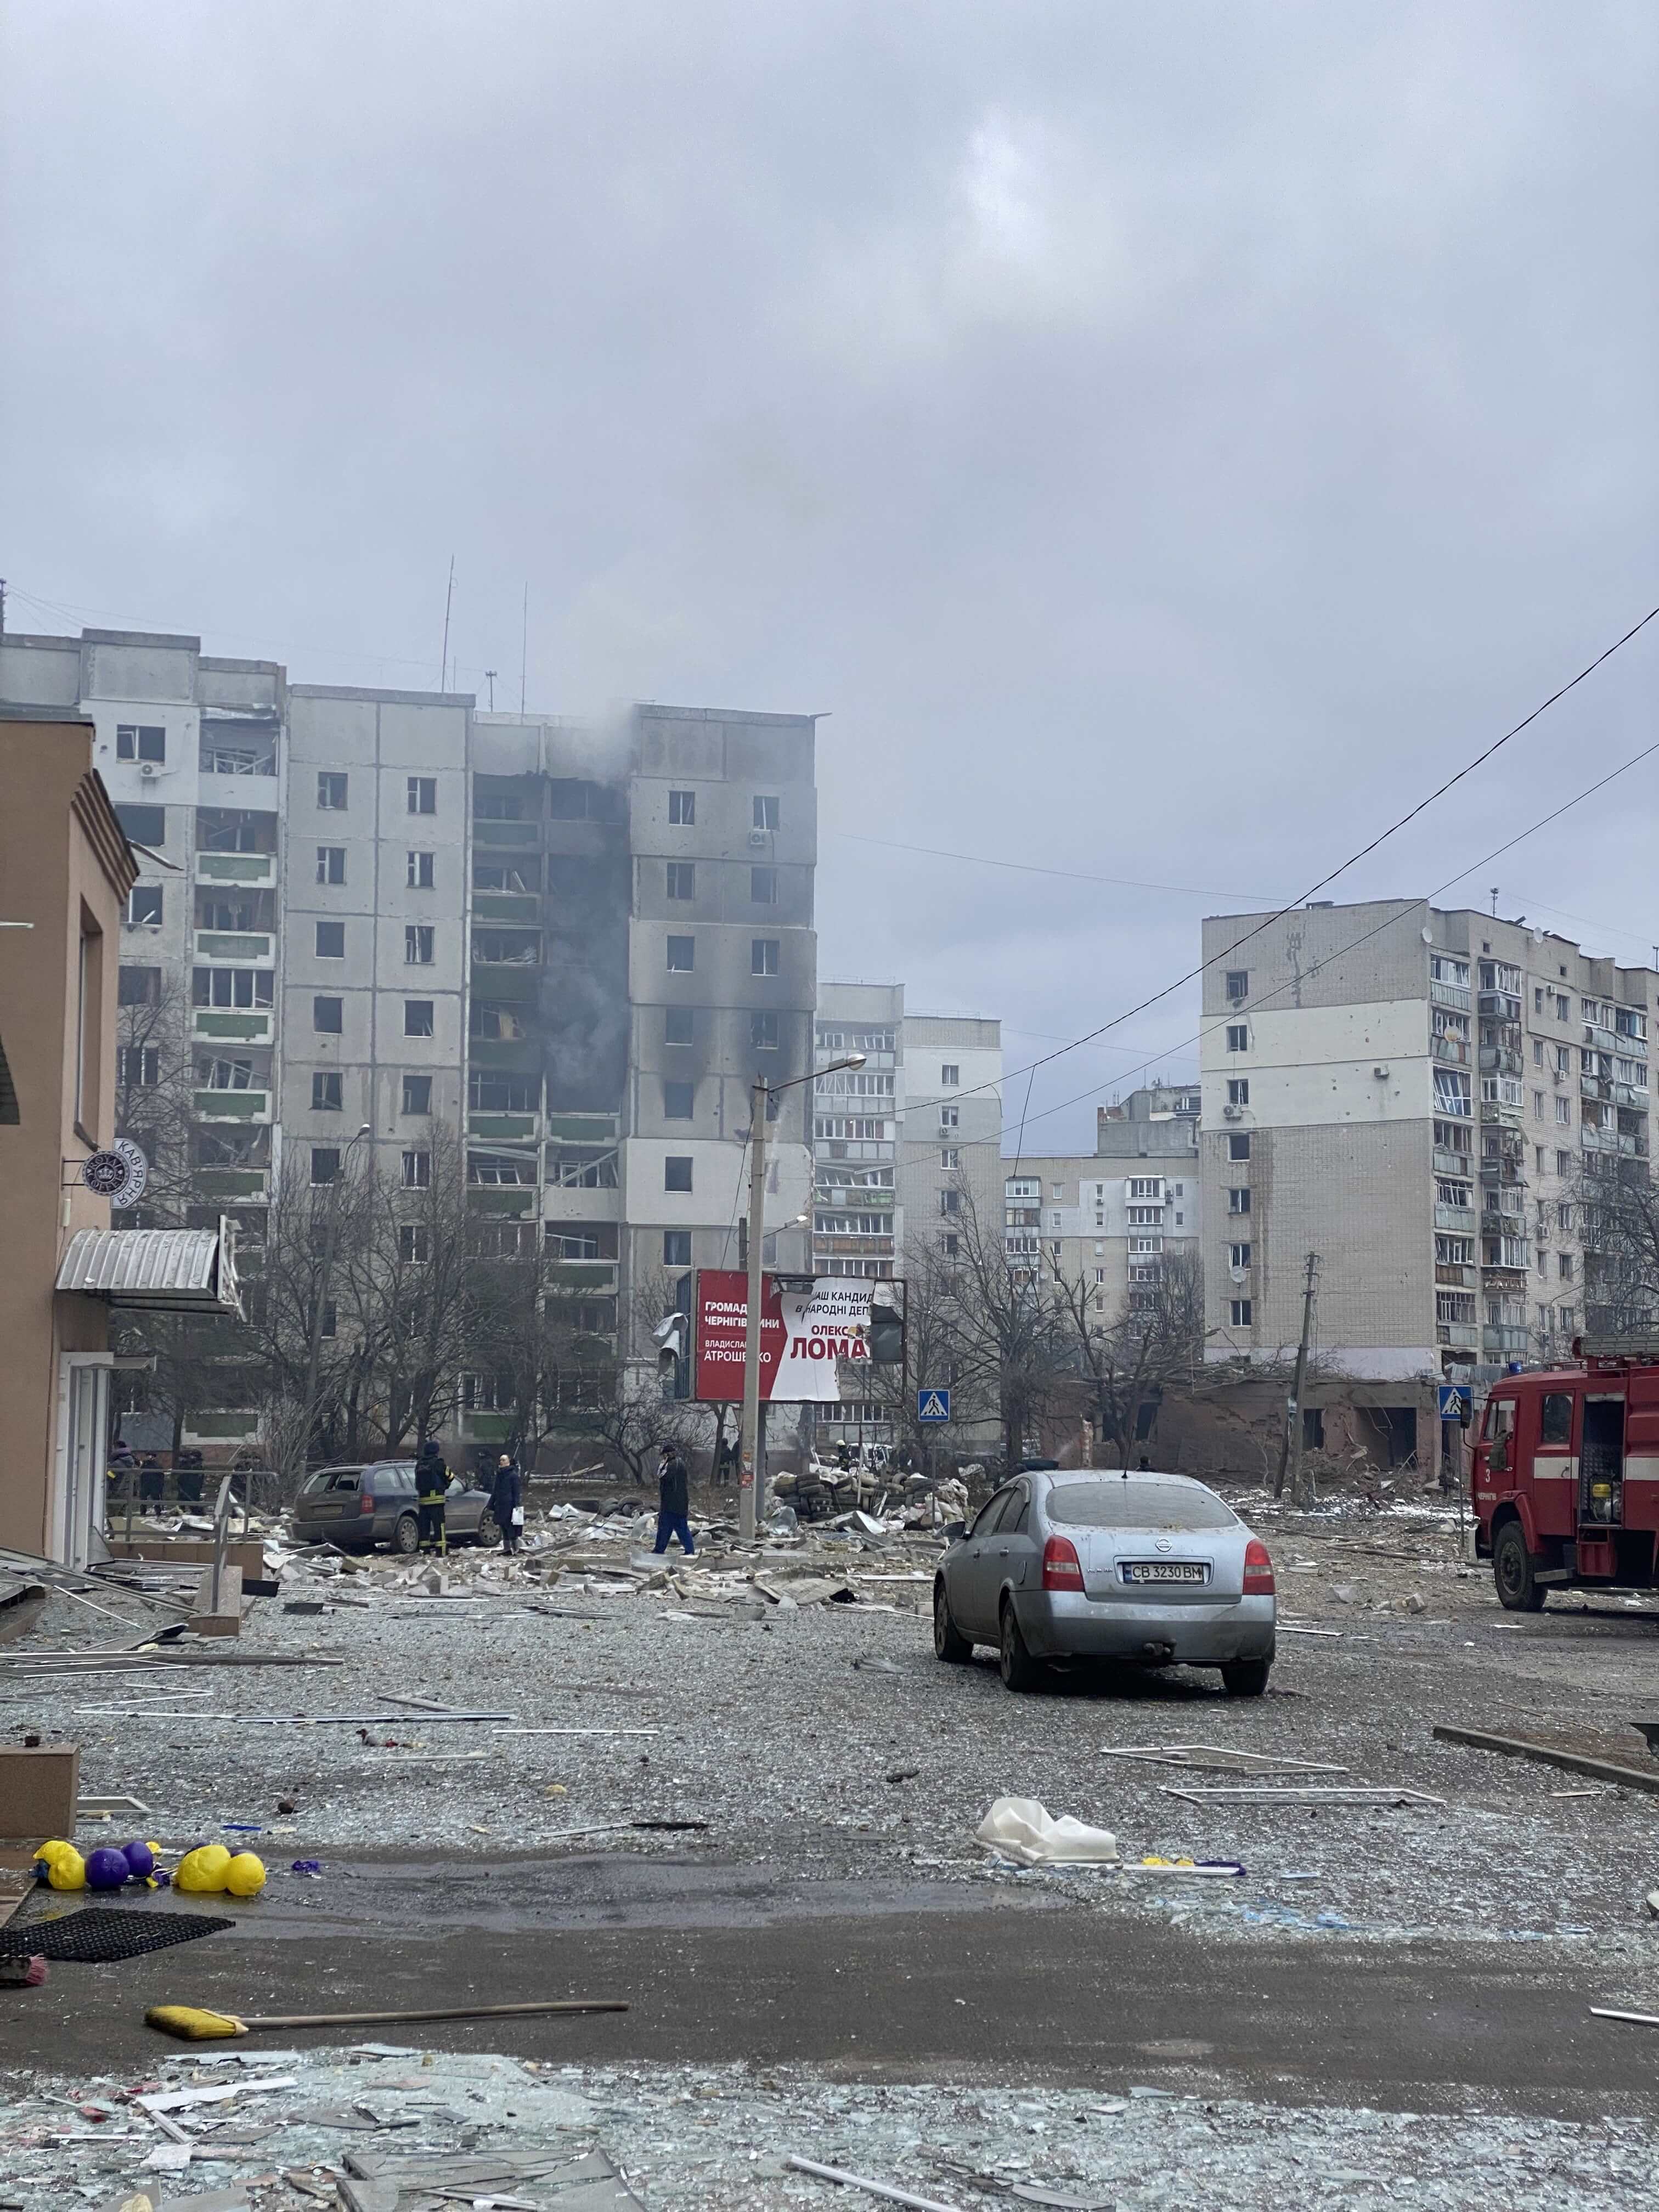 Damaged residential buildings in the city of Chernihiv in northern Ukraine